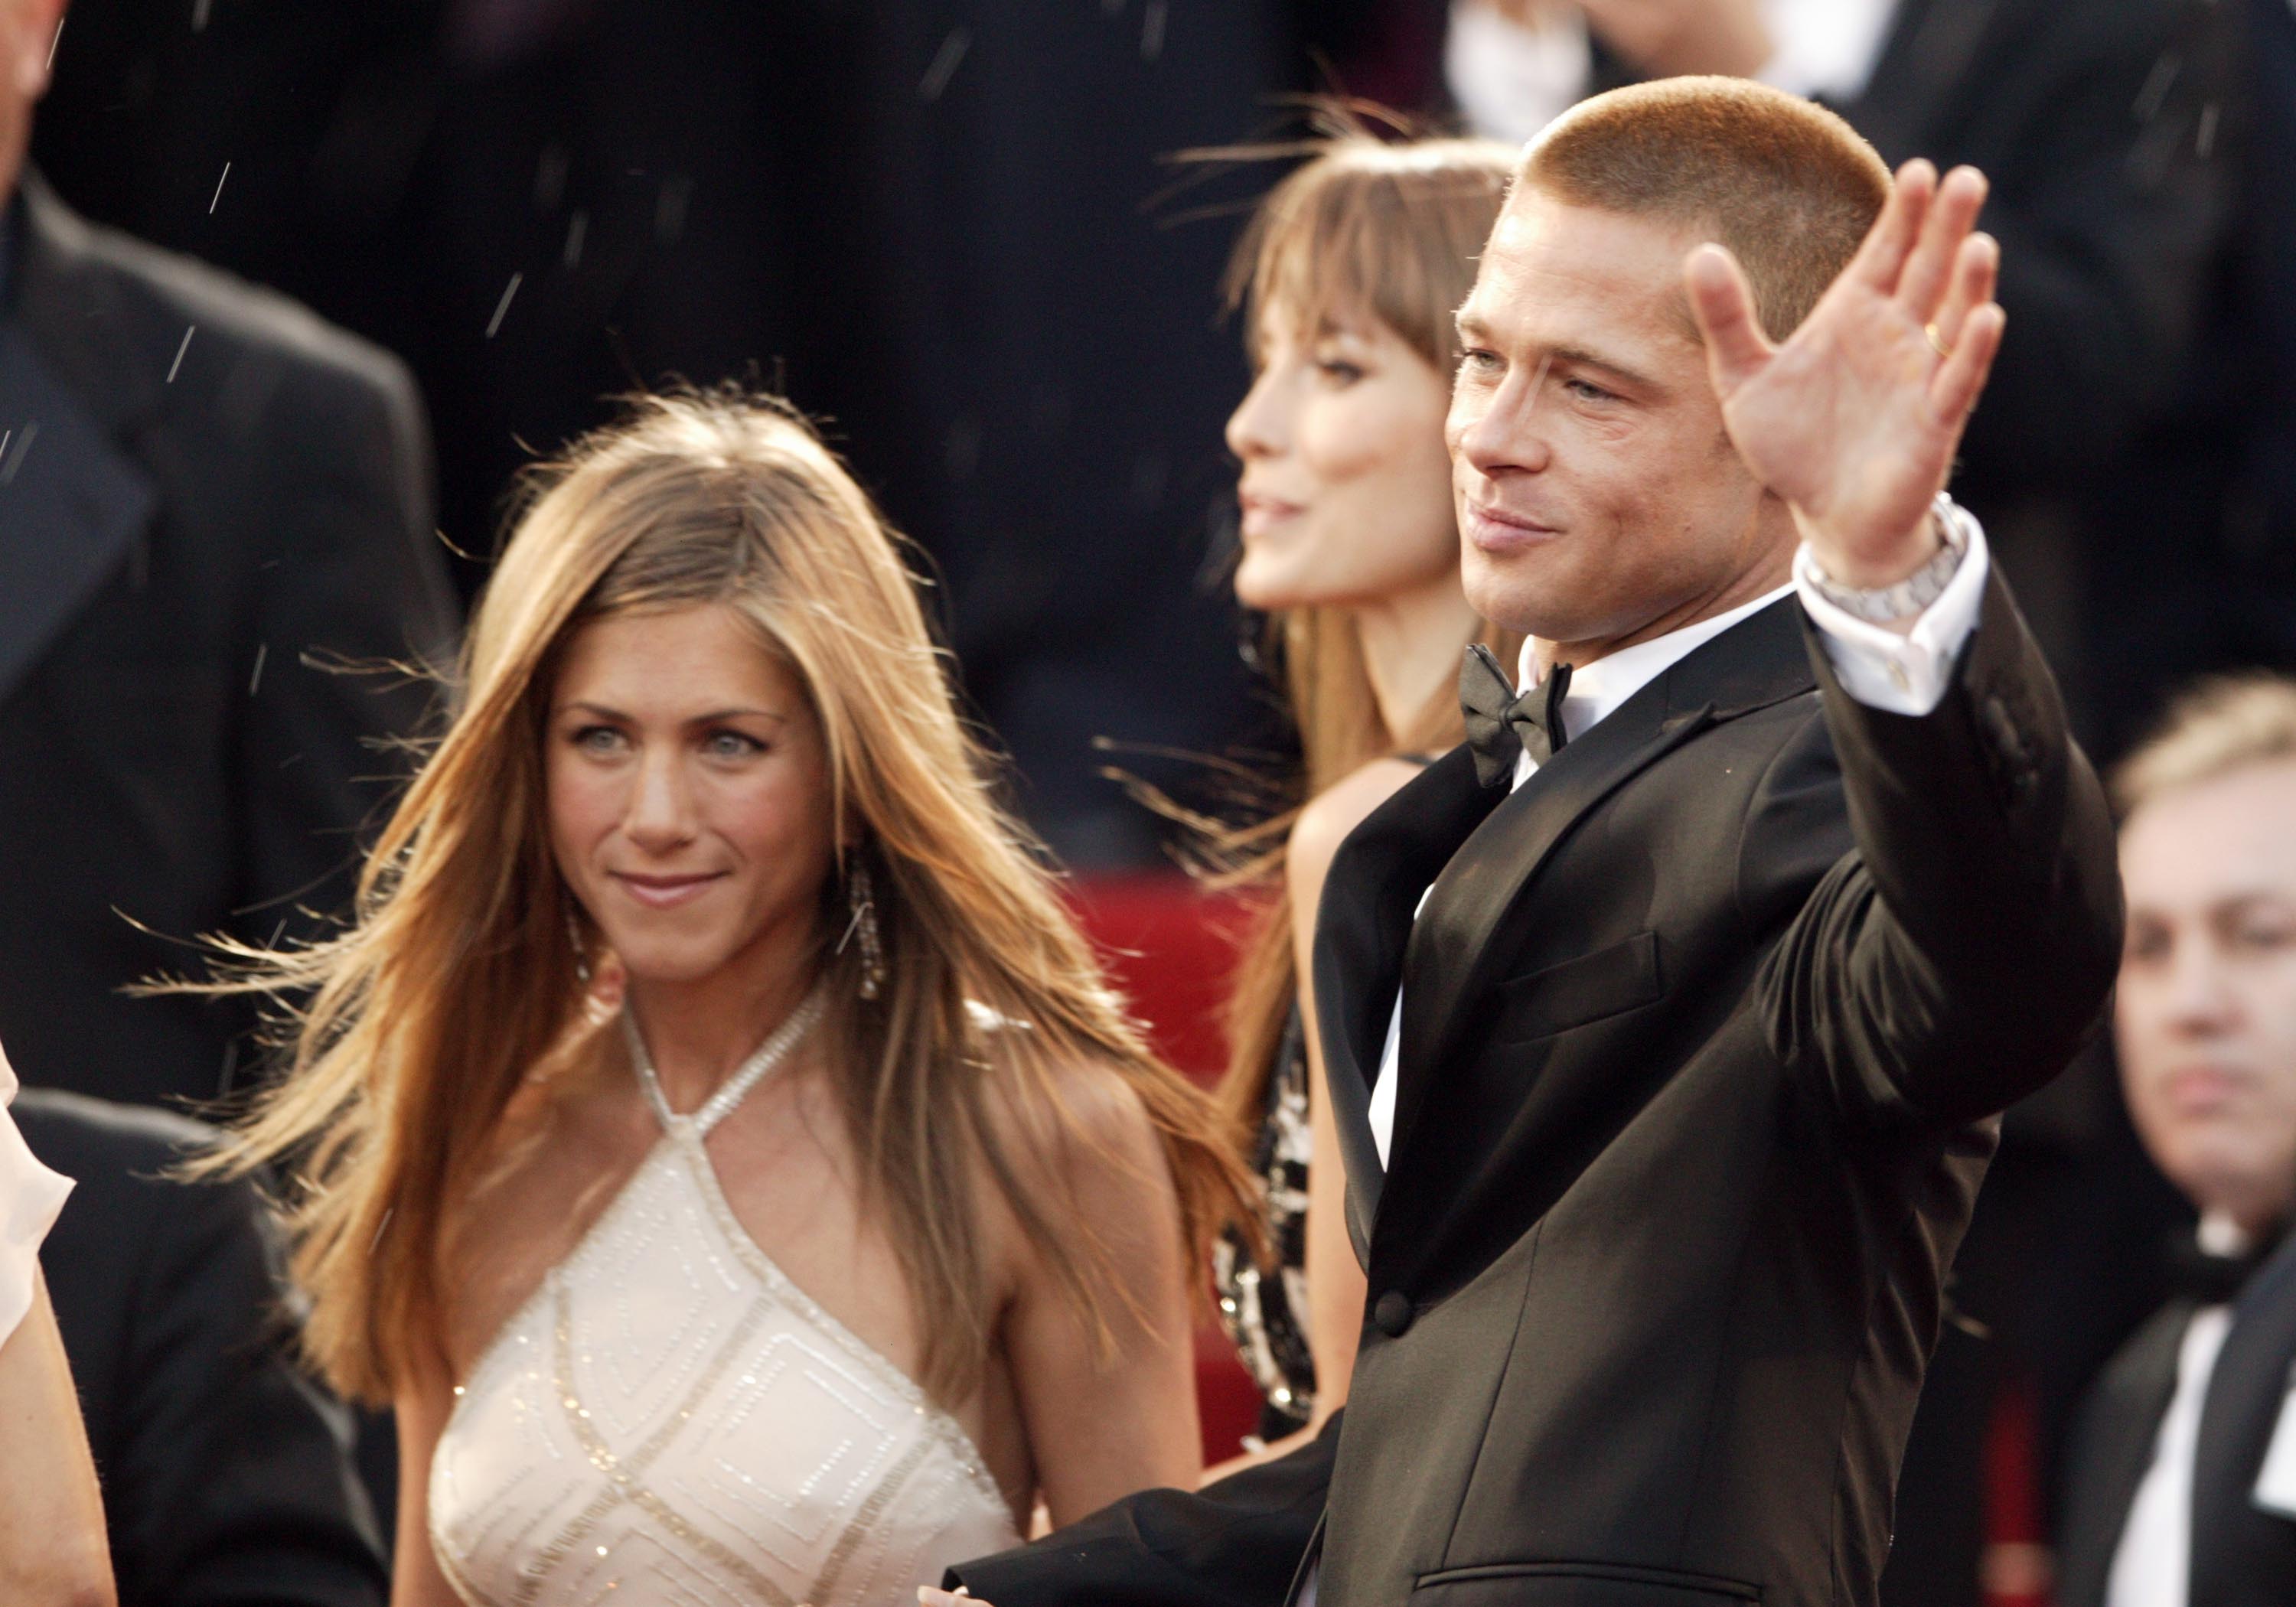 Brad Pitt and Jennifer Aniston attend the World Premiere of epic movie "Troy" at Le Palais de Festival on May 13, 2004 in Cannes, France. | Source: Getty Images.